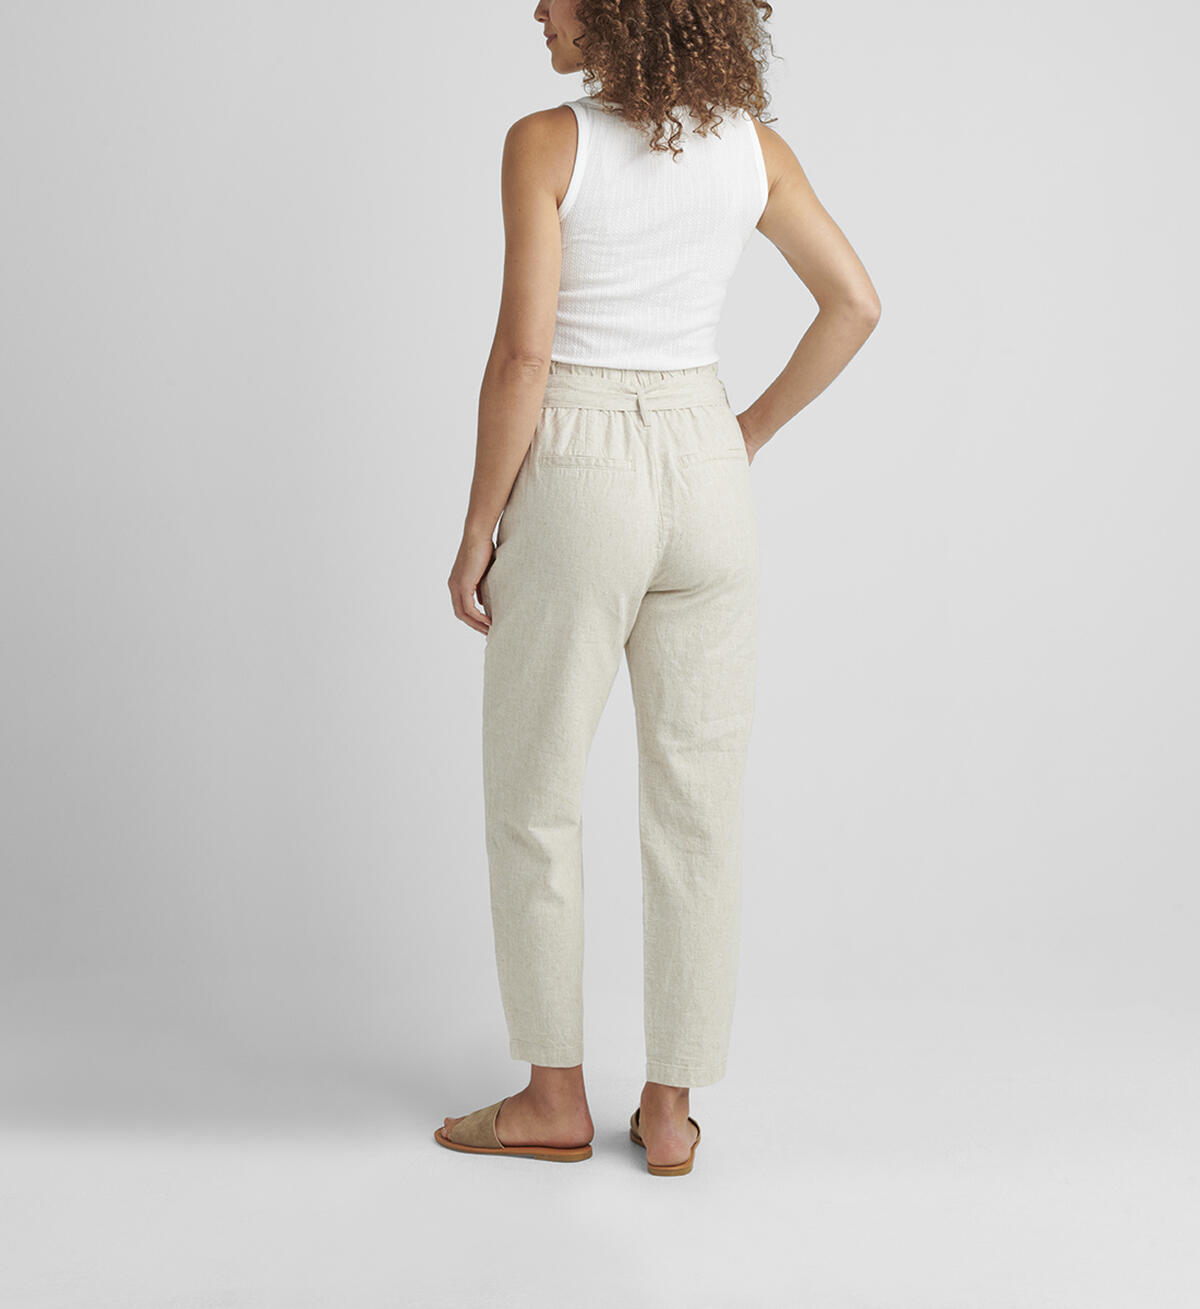 Belted Pleat High Rise Tapered Leg Pant, , hi-res image number 1